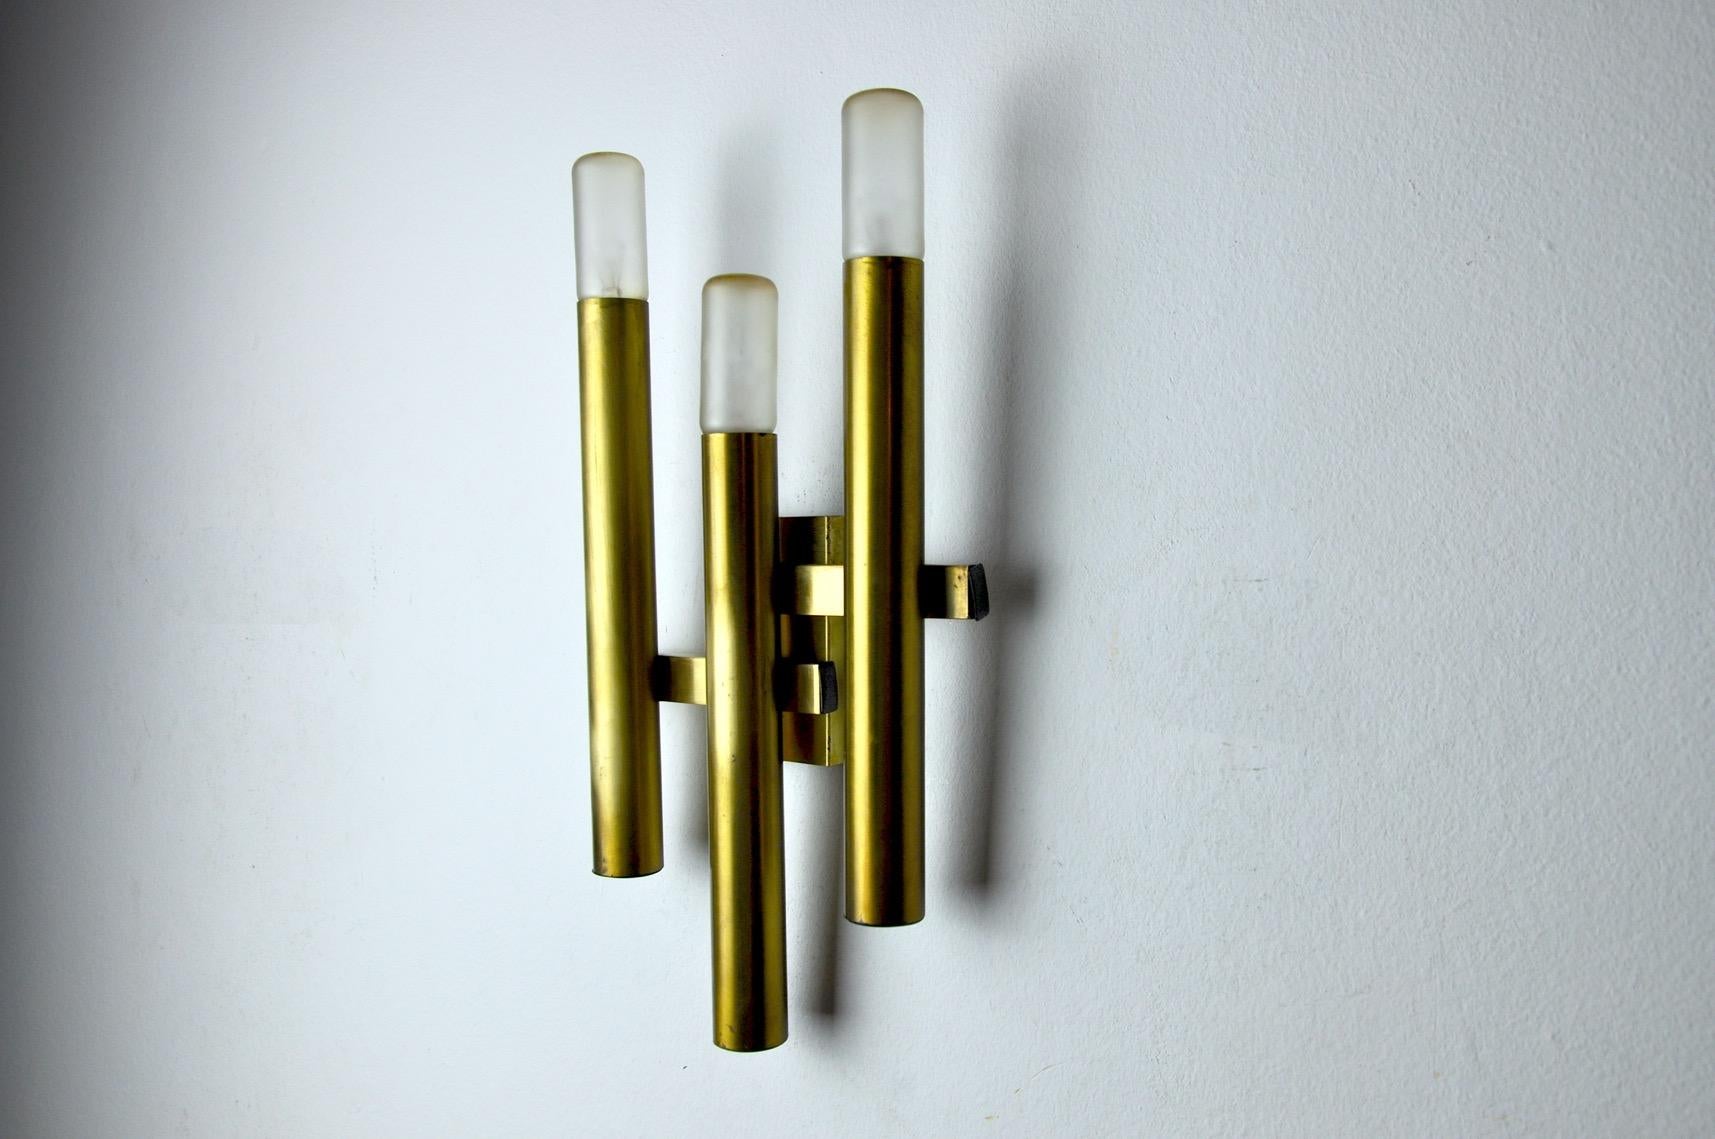 Very nice wall lamp of the house sciolari for baker. This wall lamp three arms in golden brass is composed of 3 points of light. Very beautiful design object that will illuminate your interior wonderfully. Verified electricity, time marks relating